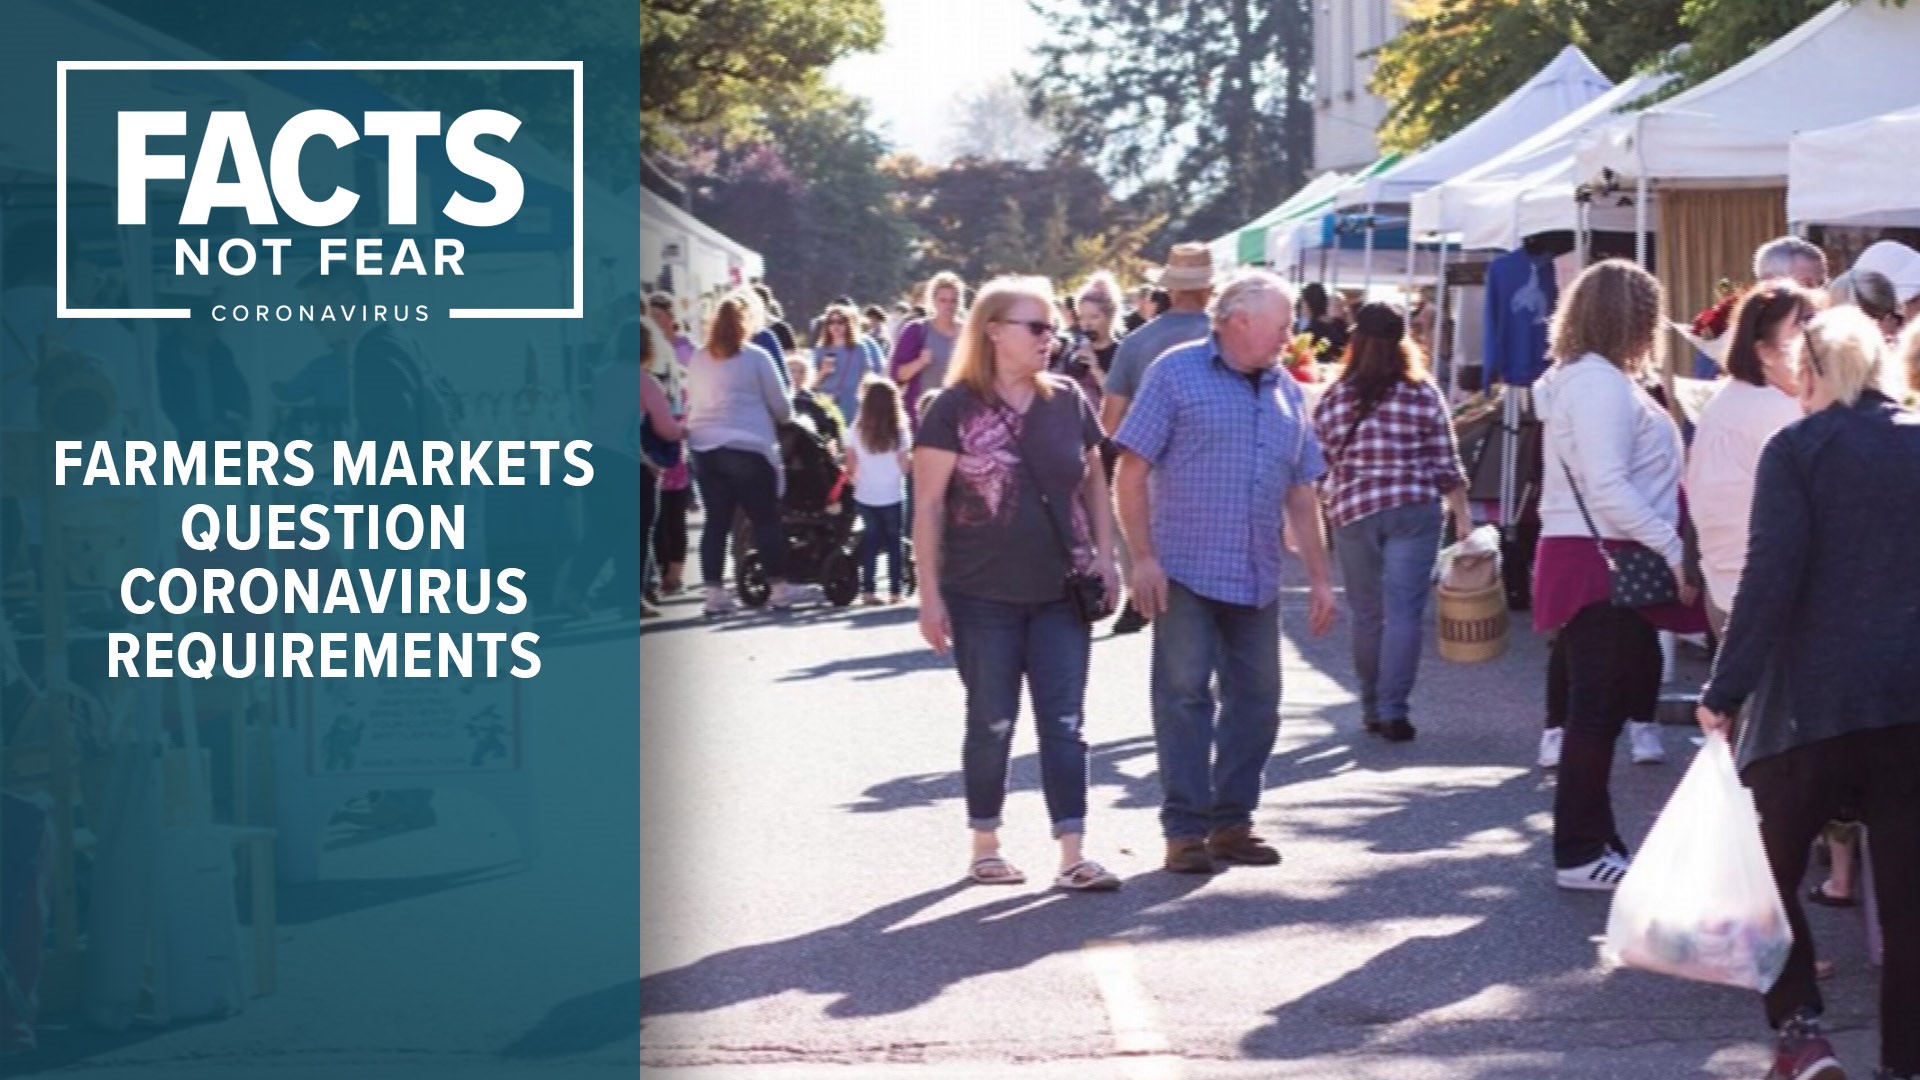 Farmers markets are considered essential businesses like grocery stores, but they remain closed.